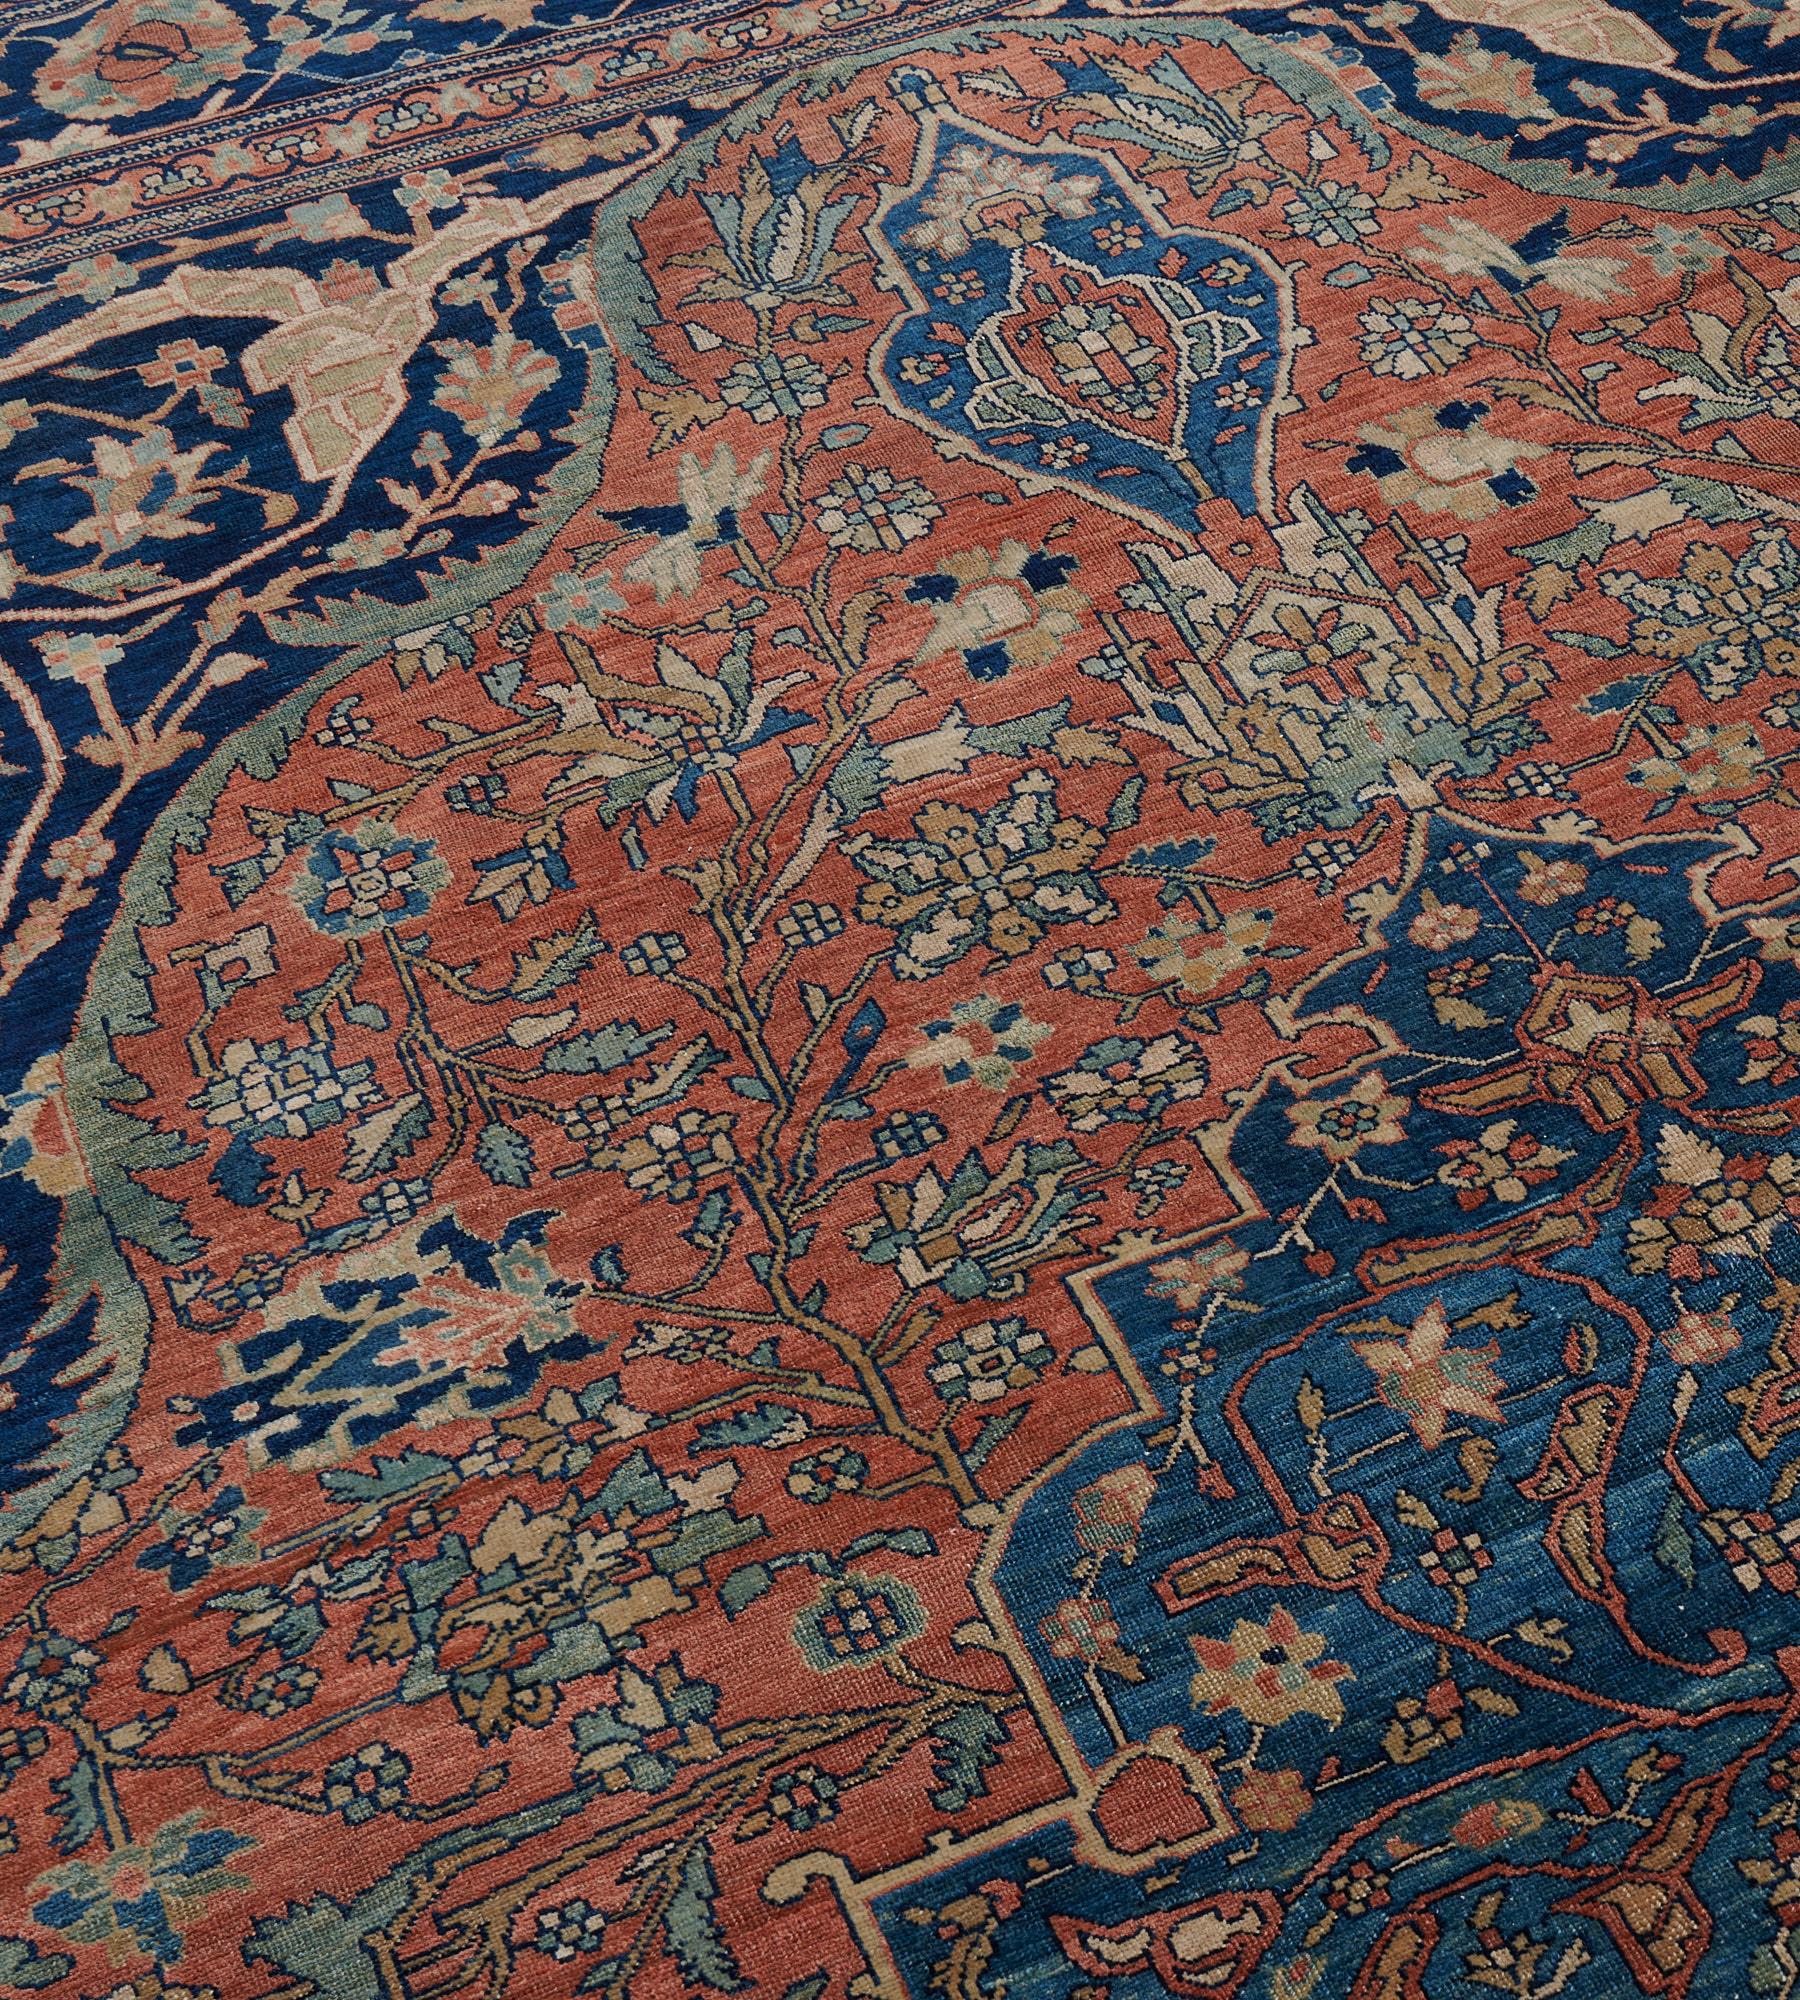 This antique Persian Sarouk rug has a brick-red field with a delicate palmette and leafy vine around a large central light blue cusped medallion and palmette pendants, a central brick-red lozenge medallion with a delicate scrolling palmette vine